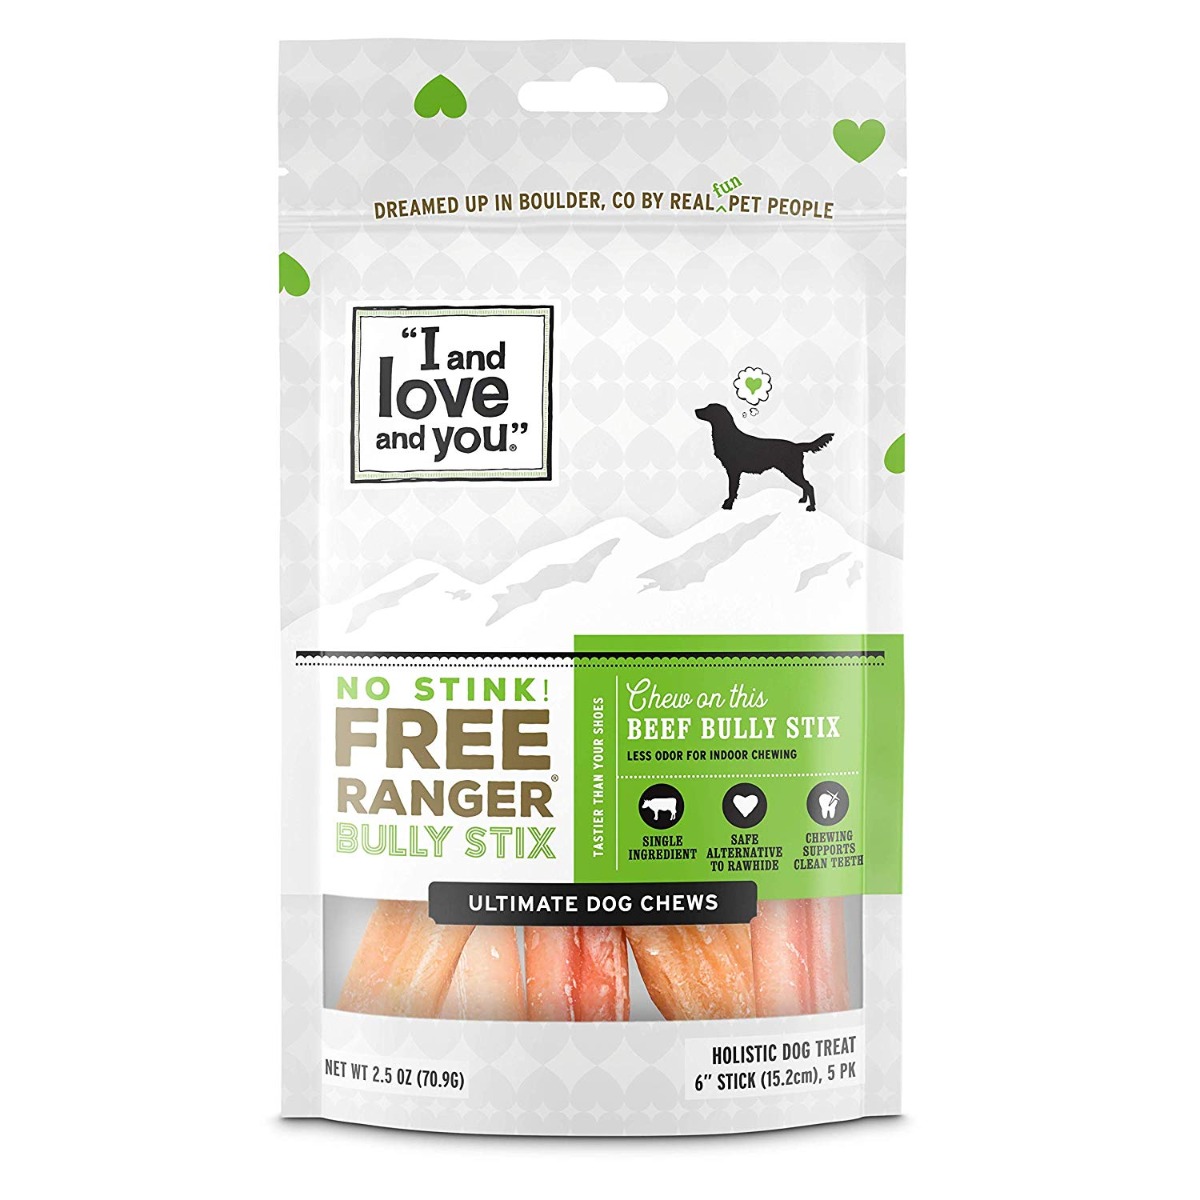 Picture of I & Love & You KHLV00133388 2.5 oz No Stink Free Ranger Beef Bully Stix Chews Dog Food